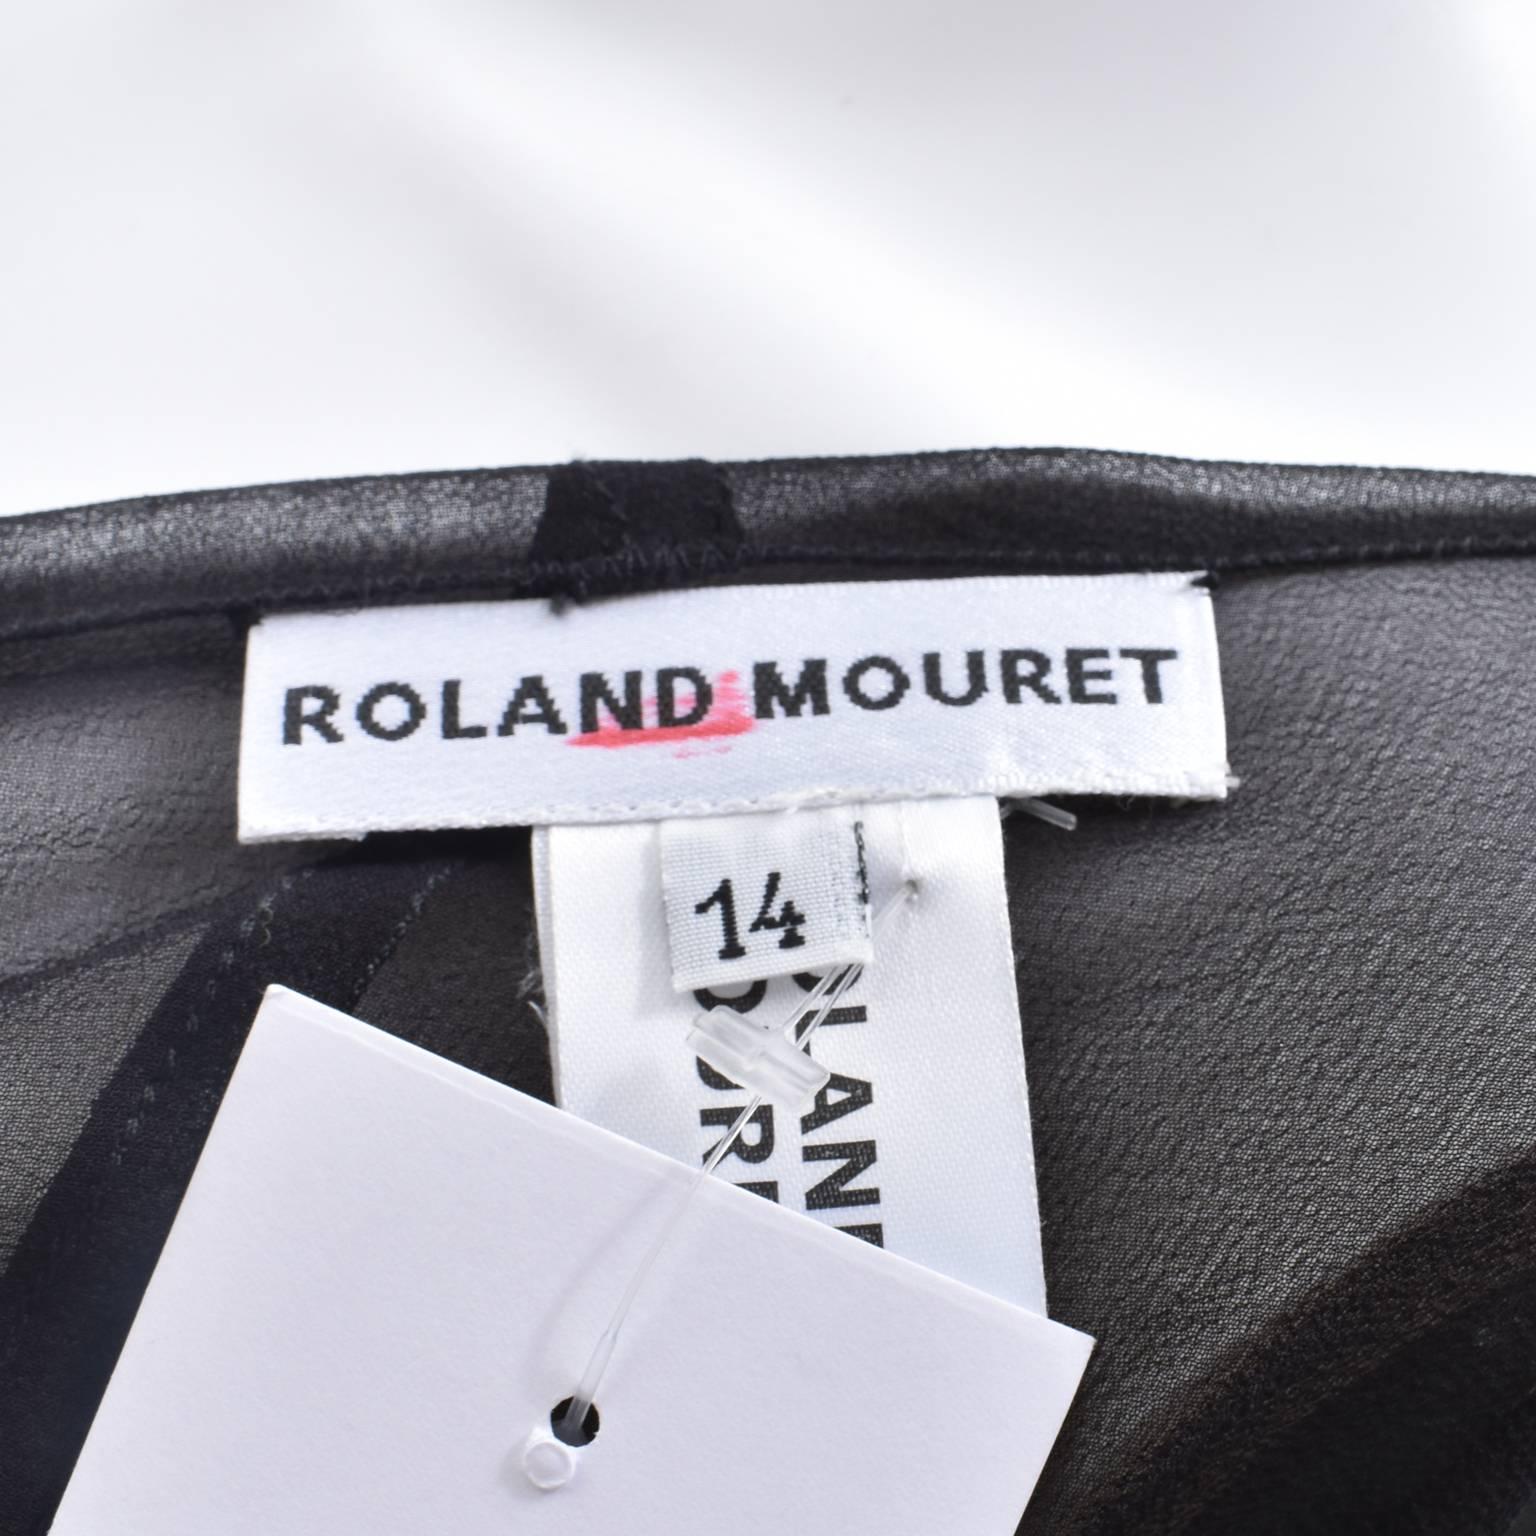 Roland Mouret Black Sheer Silk Tie Blouse with Cut-Out Details c.2010 For Sale 4